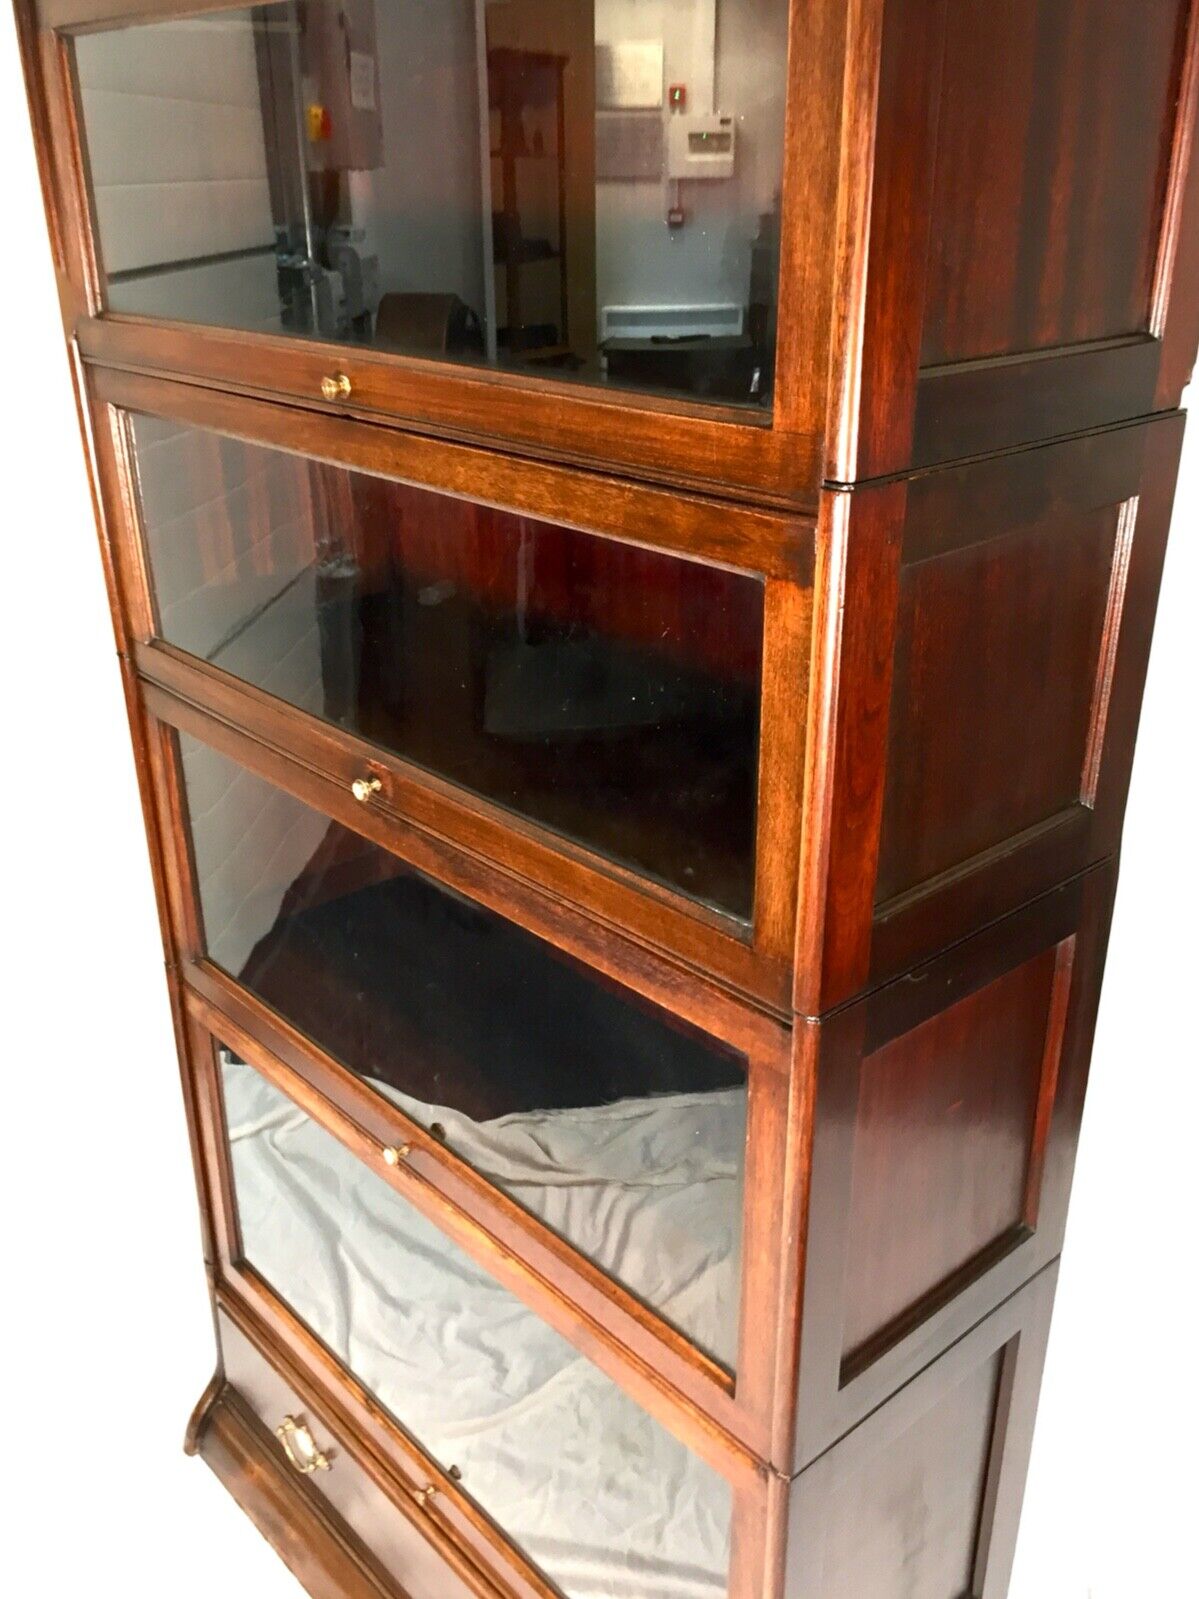 Antique Large Mahogany Glazed Sectional Barristers Bookcase Display Cabinet 1910